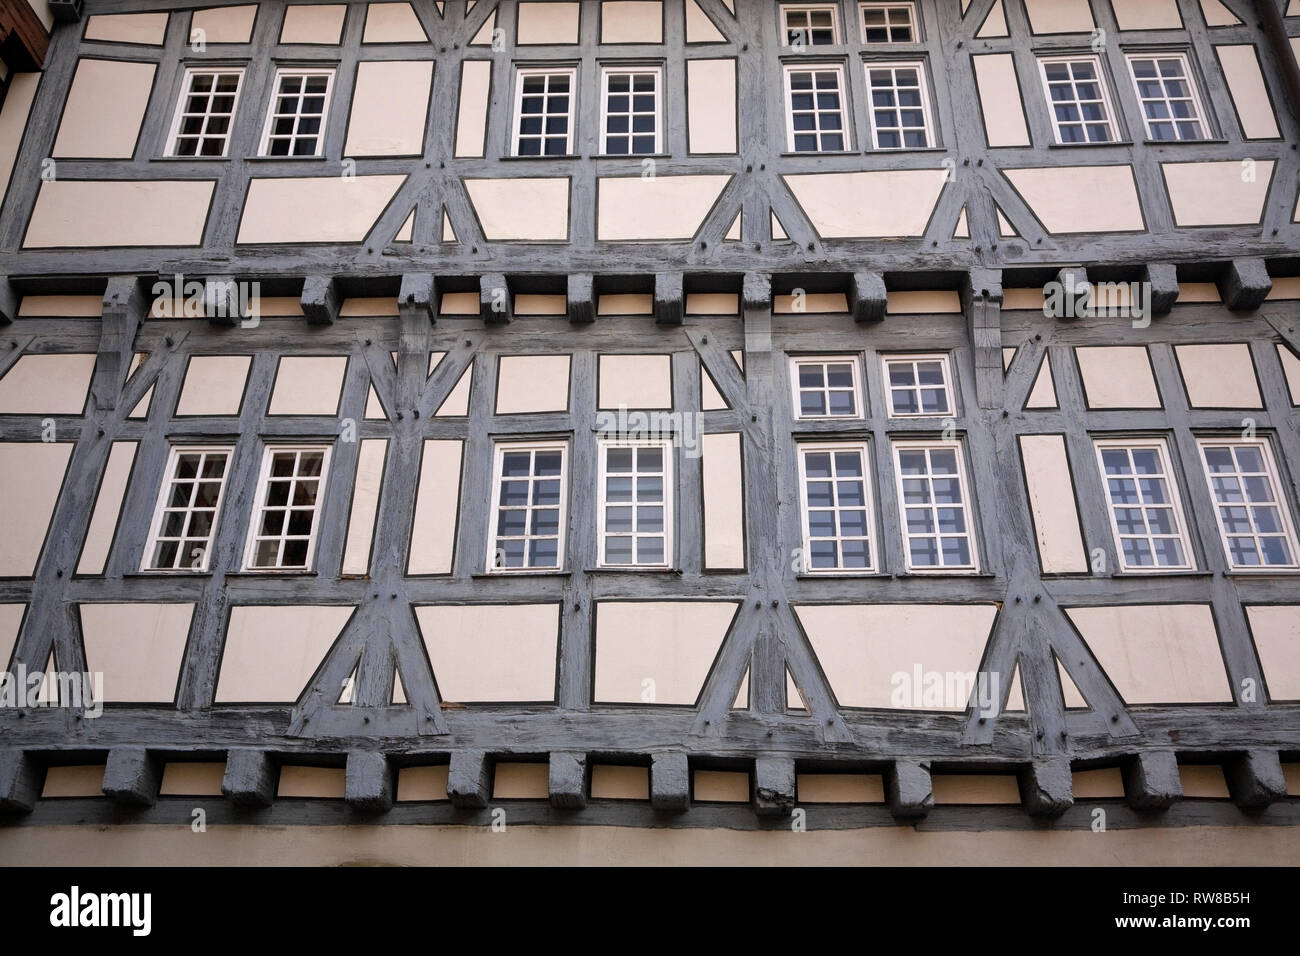 Half-timbered apartment building in the town of Bad Wimpfen, Germany Stock Photo